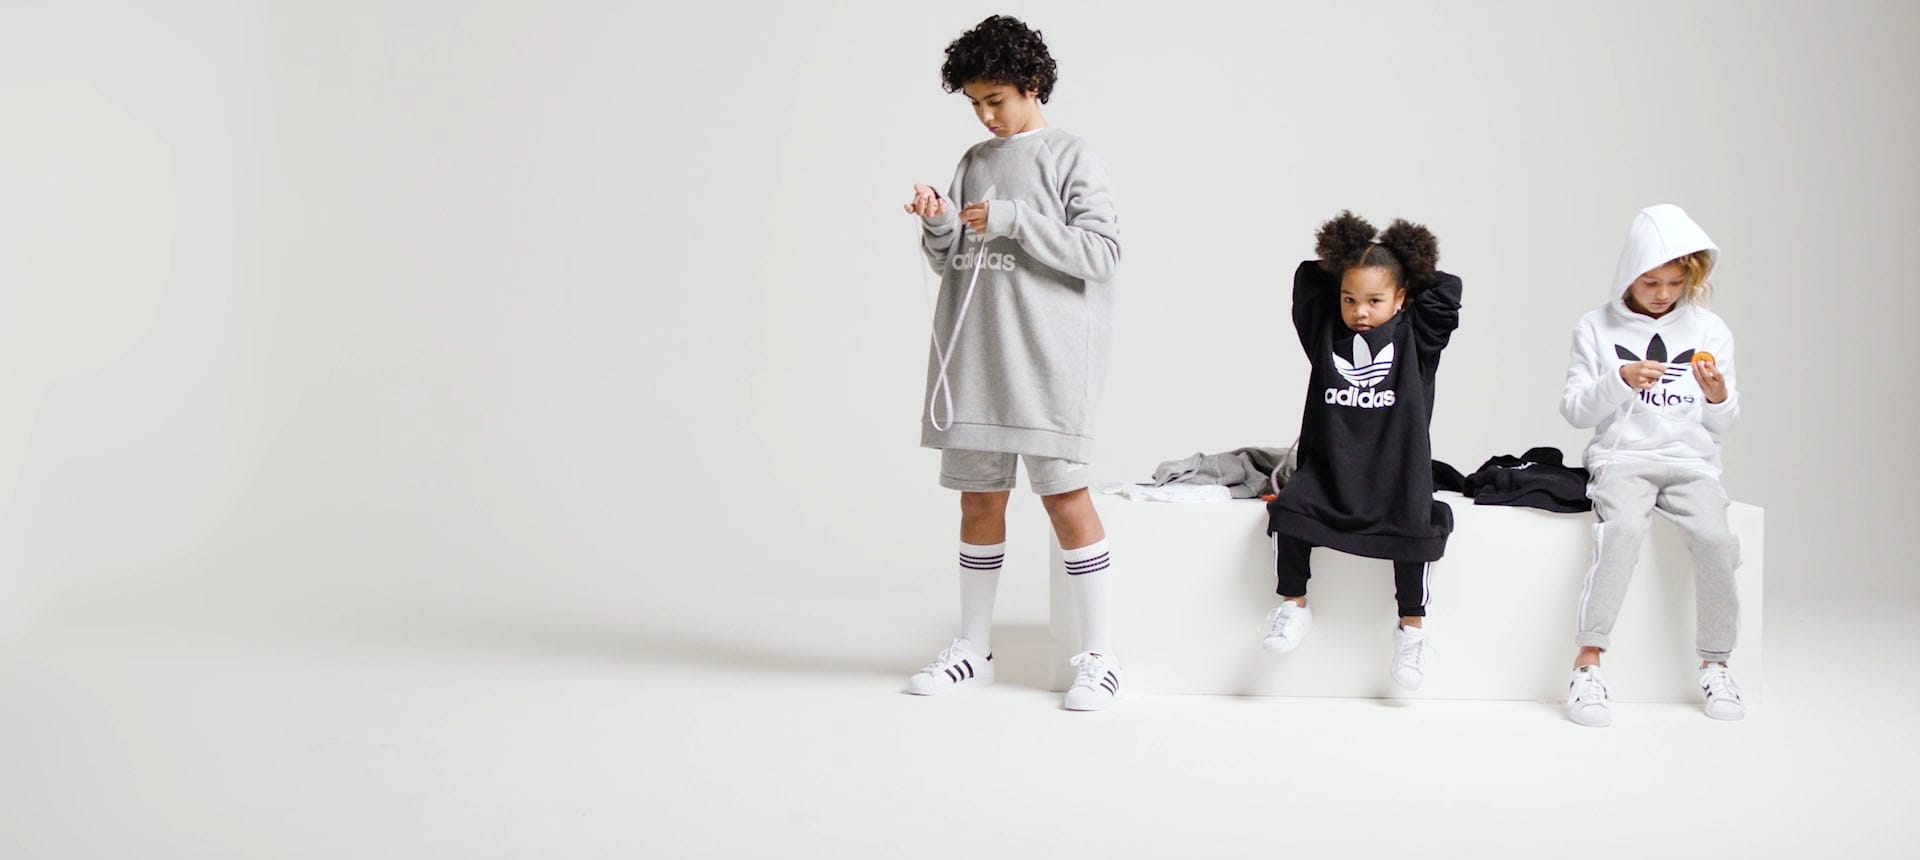 parallel escort Editor Find The Right Size Kids Clothing| adidas Clothing Fit Guide For Kids